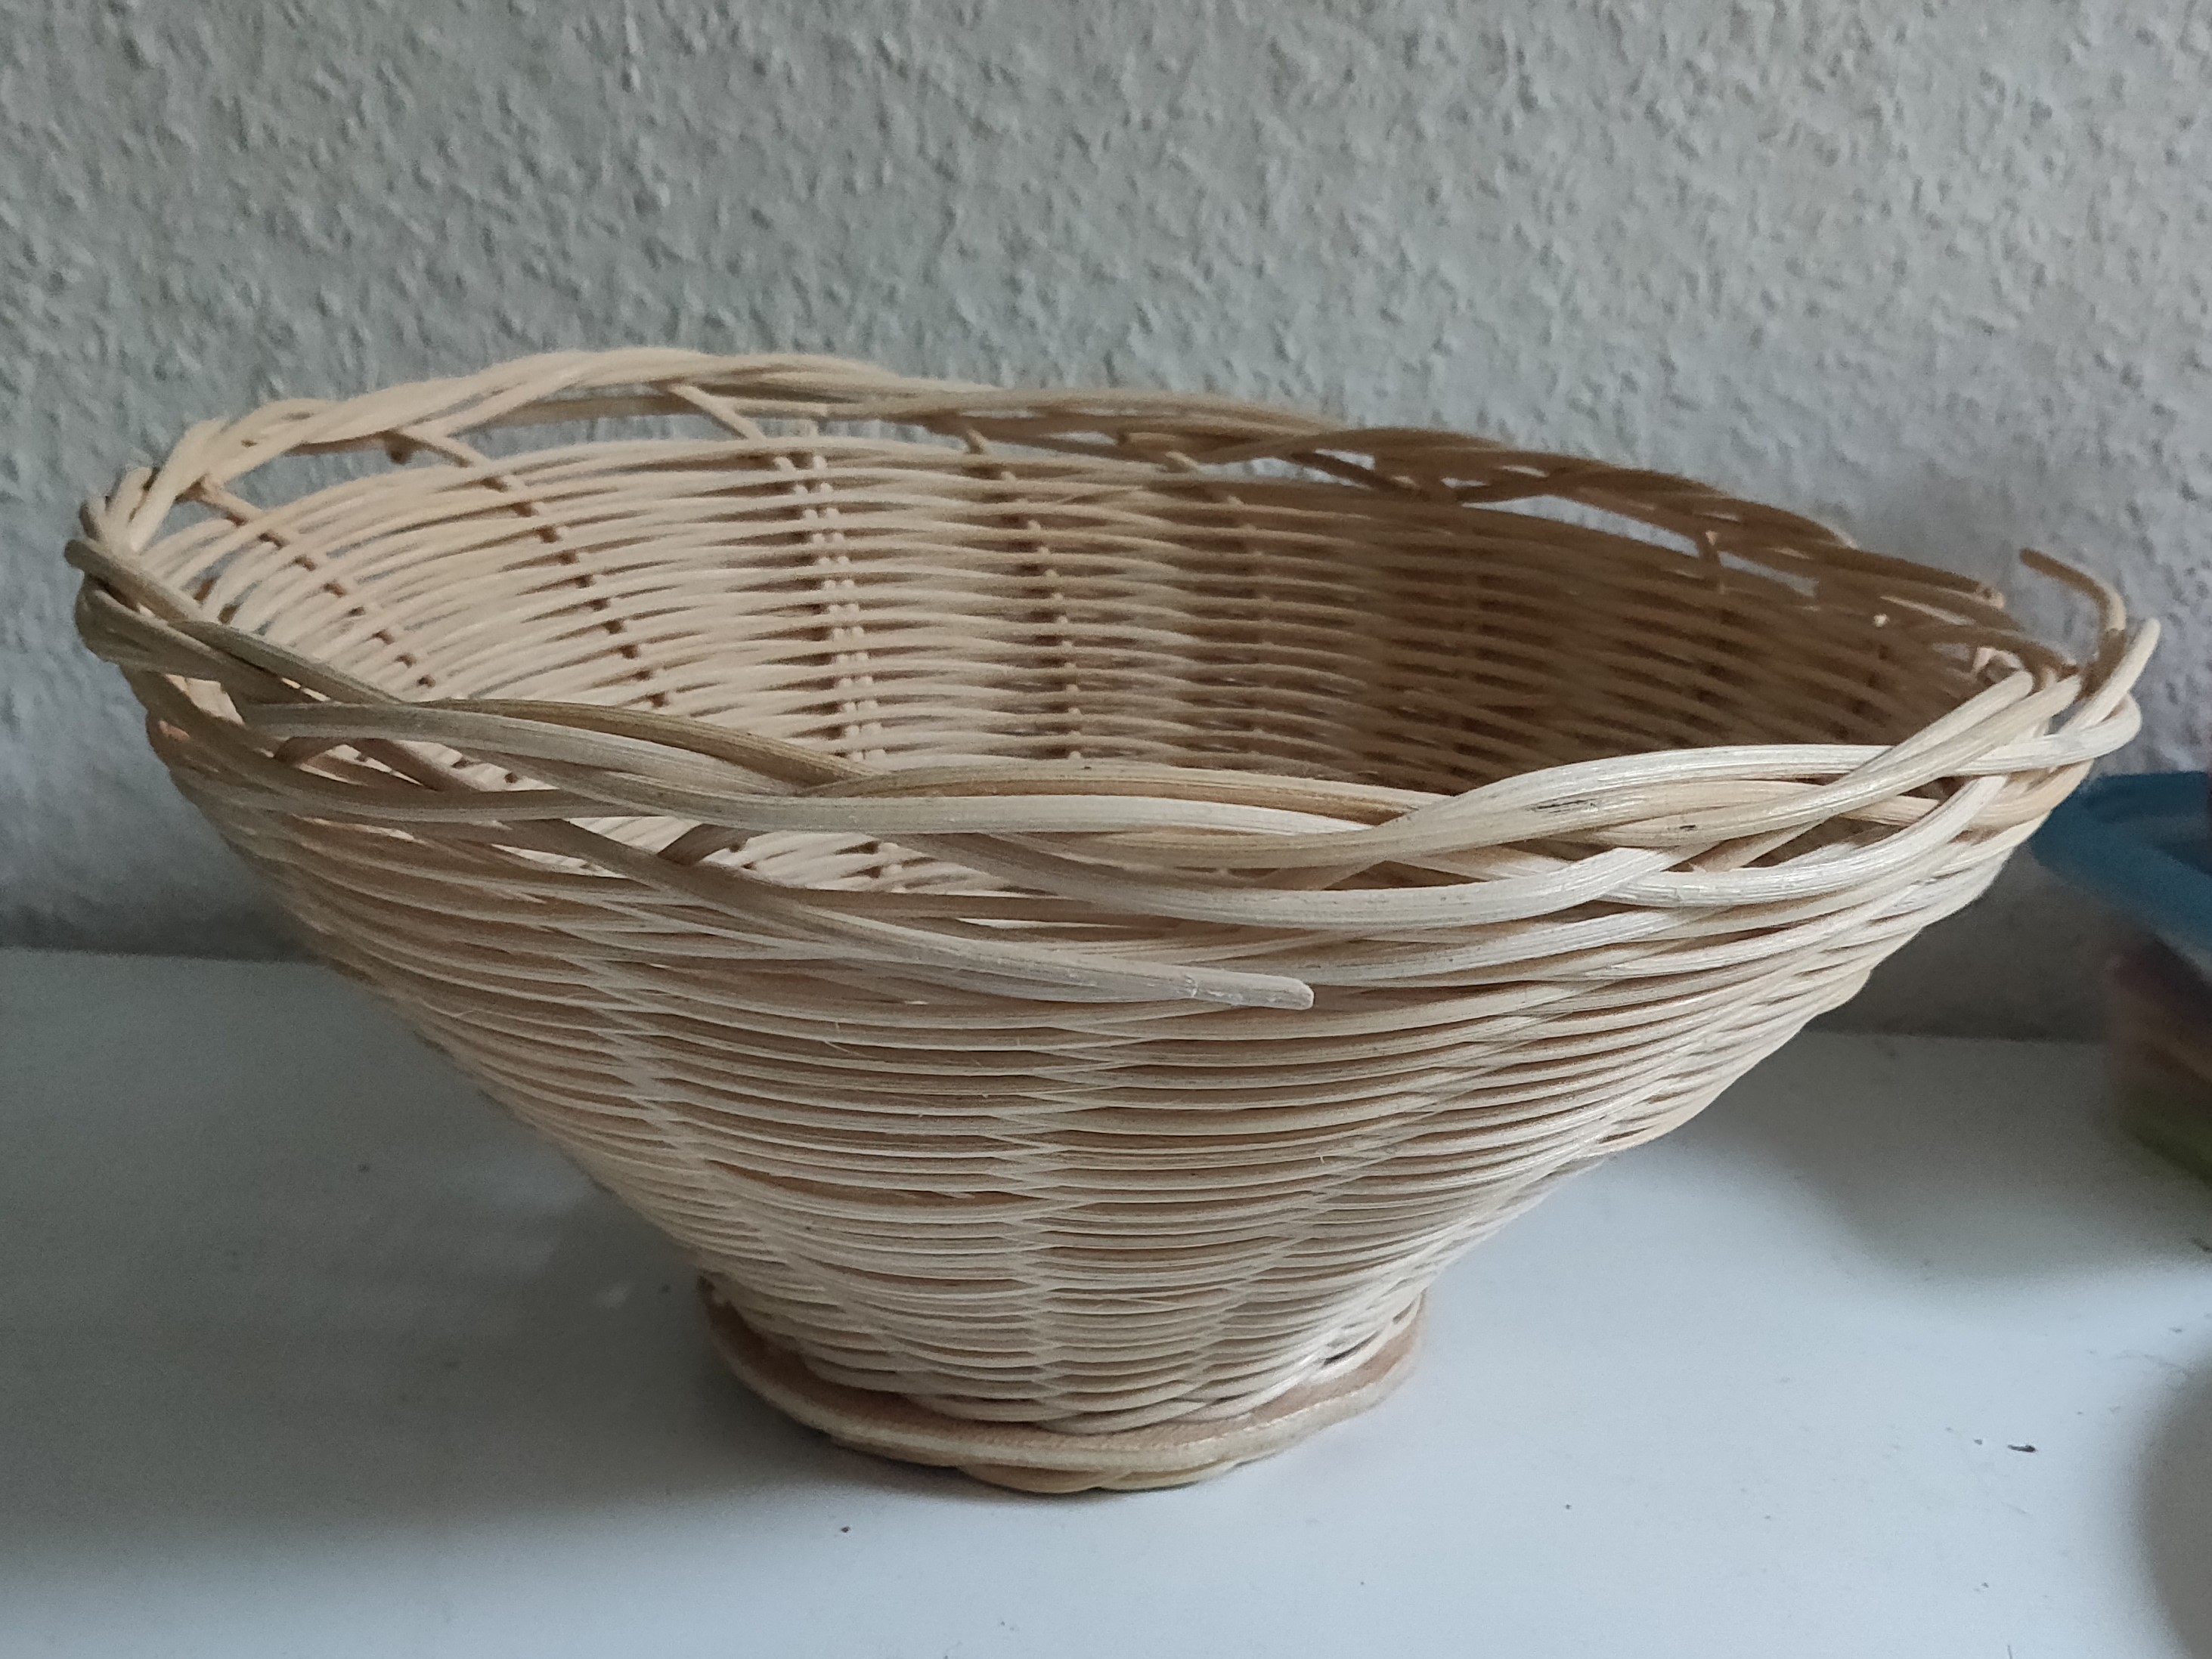 A round basket that is narrow at the bottom.